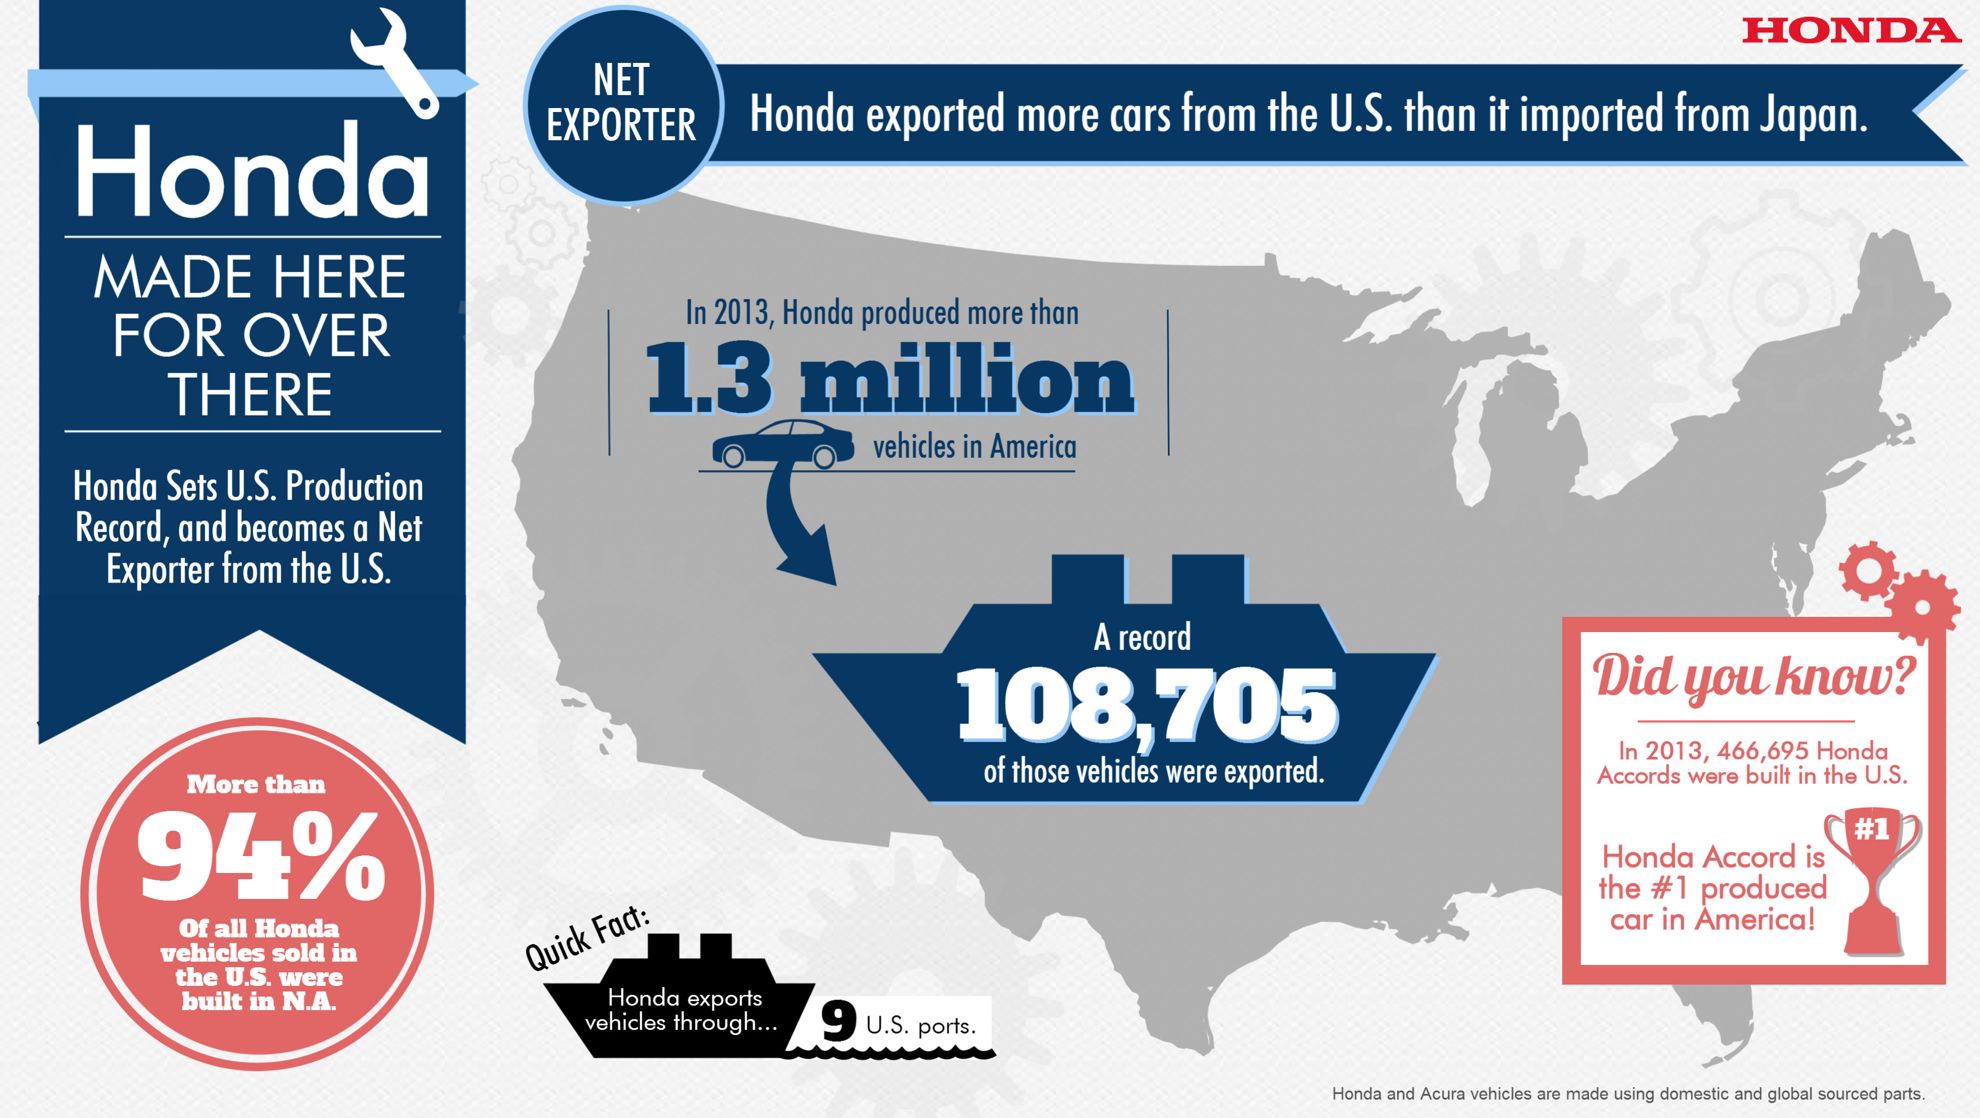 Honda Now Ships More American-made Cars from the U.S. than it imports from Japan